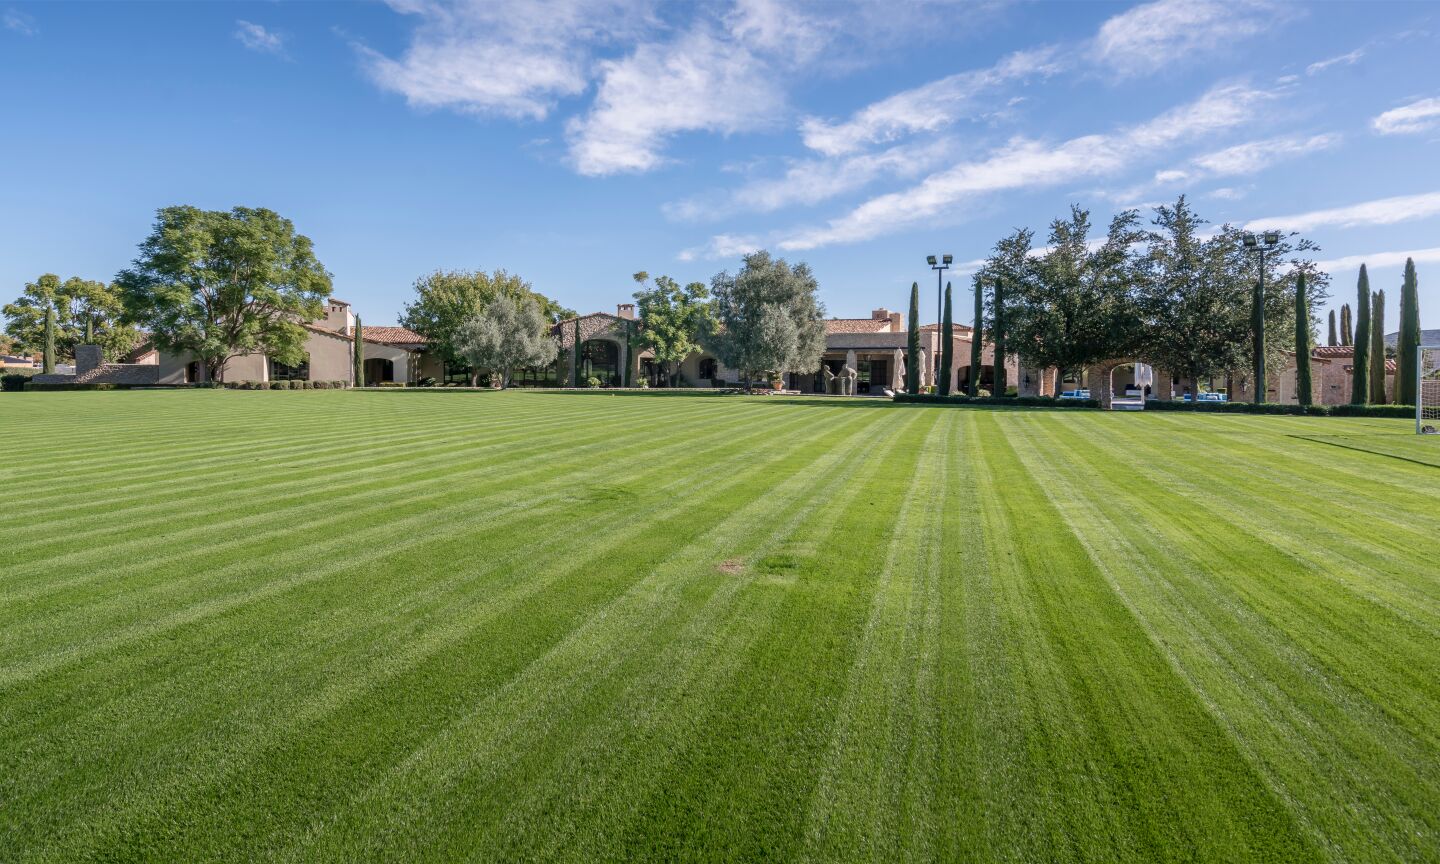 The expansive lawn